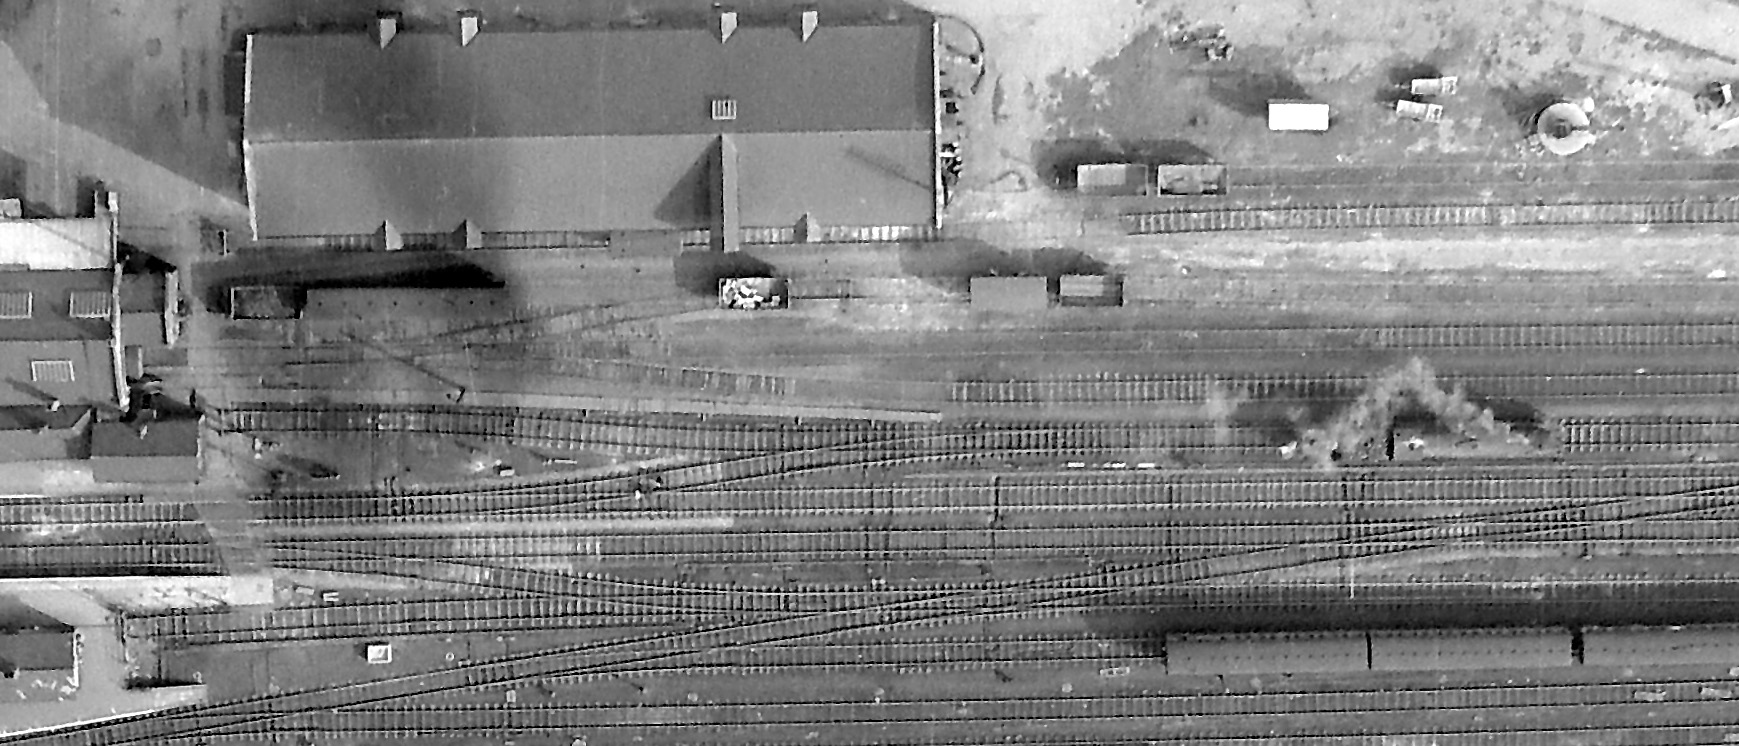 In this photograph the Yard Box is near the left edge of the picture. A passenger locomotive on the goods line is about to back into the engine spur - see the next photograph.